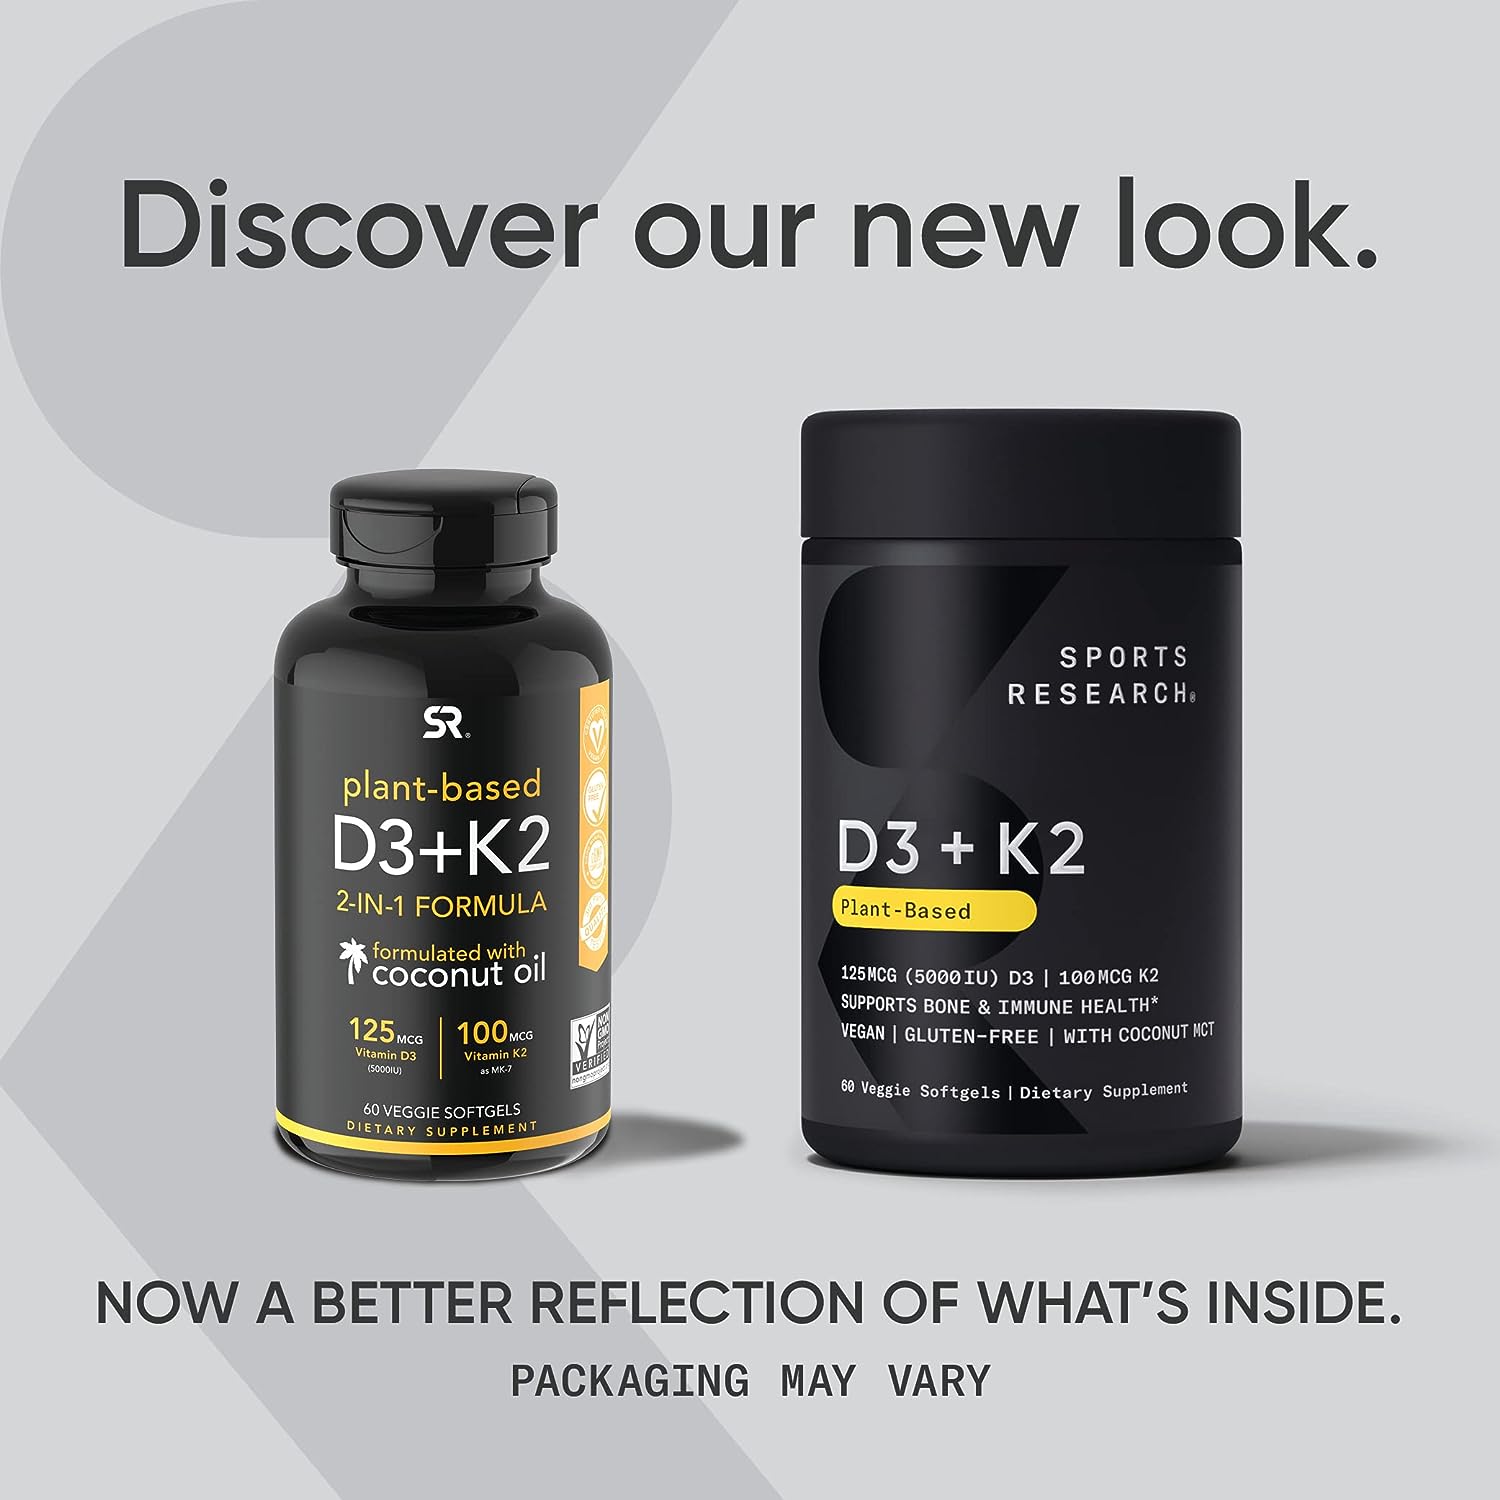 Sports Research Vitamin D3 Review